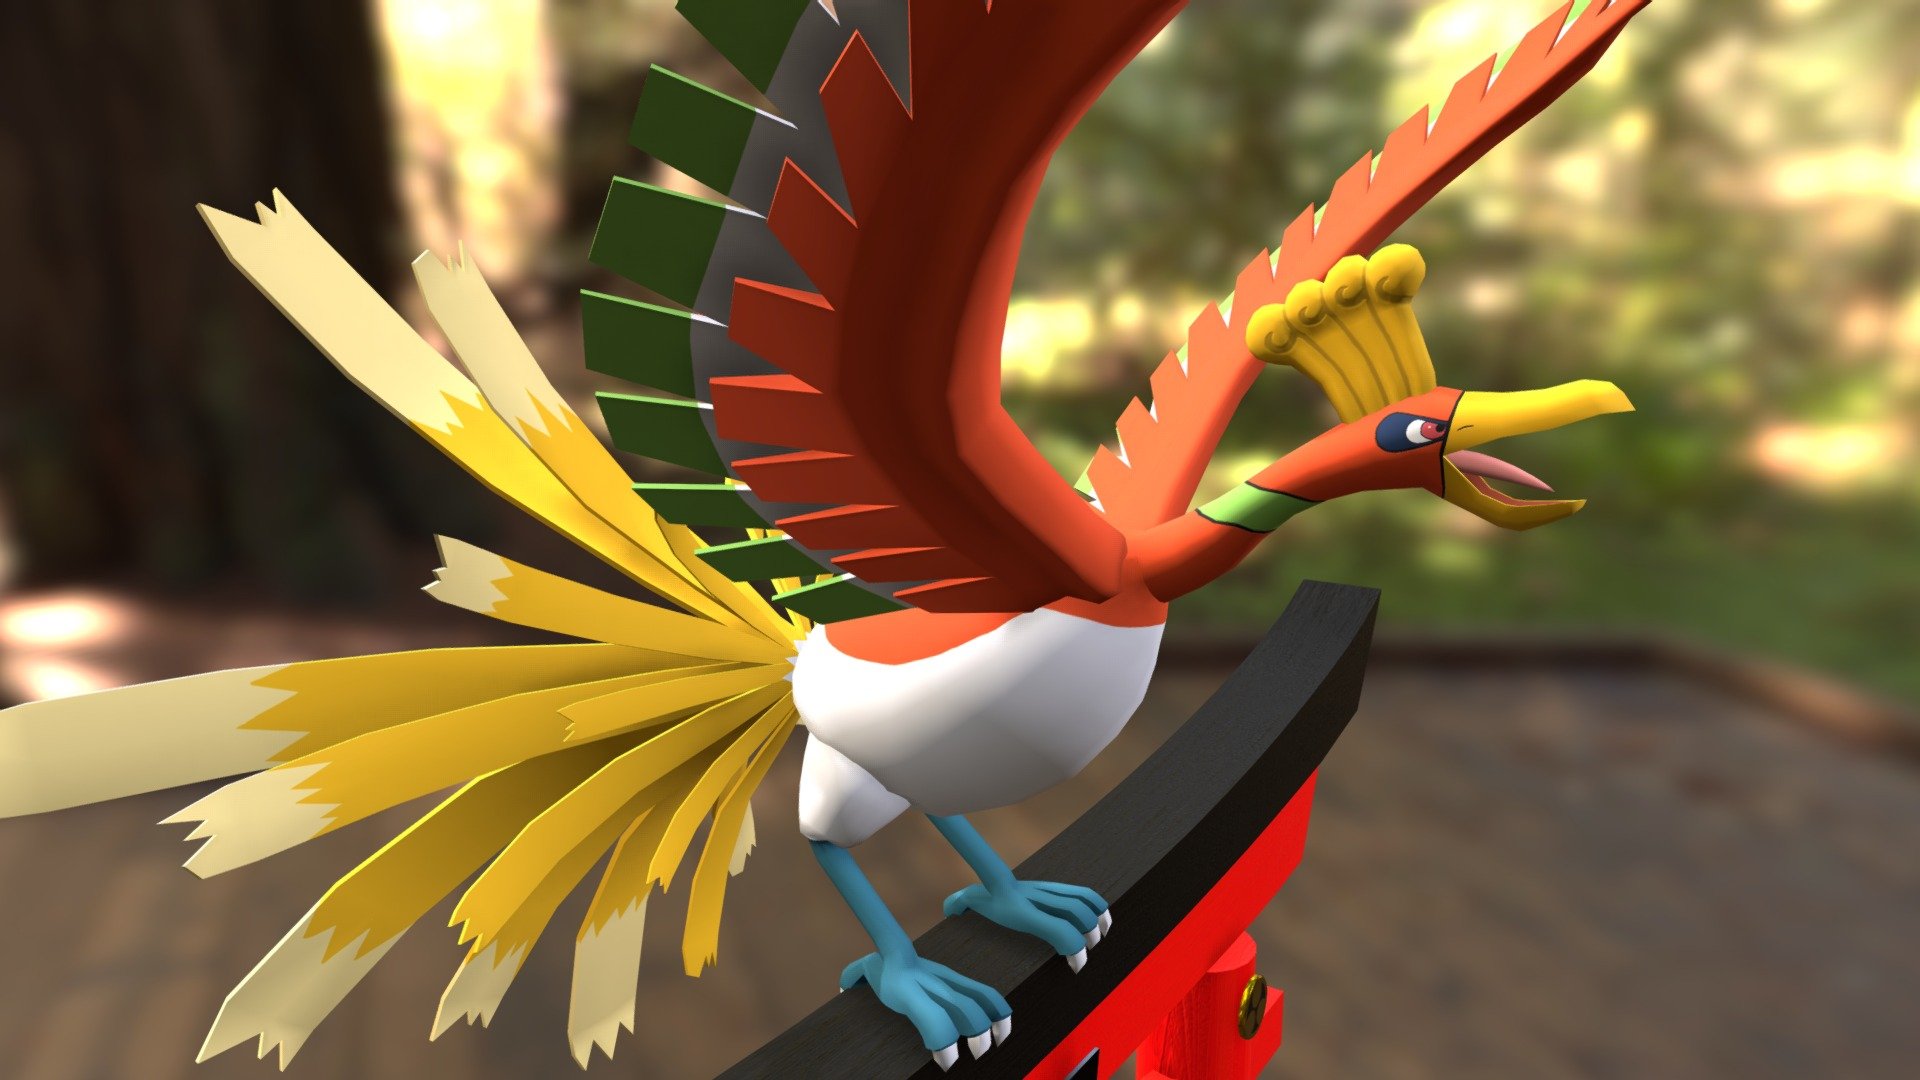 My modeling class mid-term
Pokemon Ho-Oh
pls like,follow &amp; left comment below
modeling by 3ds max
texturing by substance painter - #250 Ho-Oh - Download Free 3D model by kaiyi97 3d model